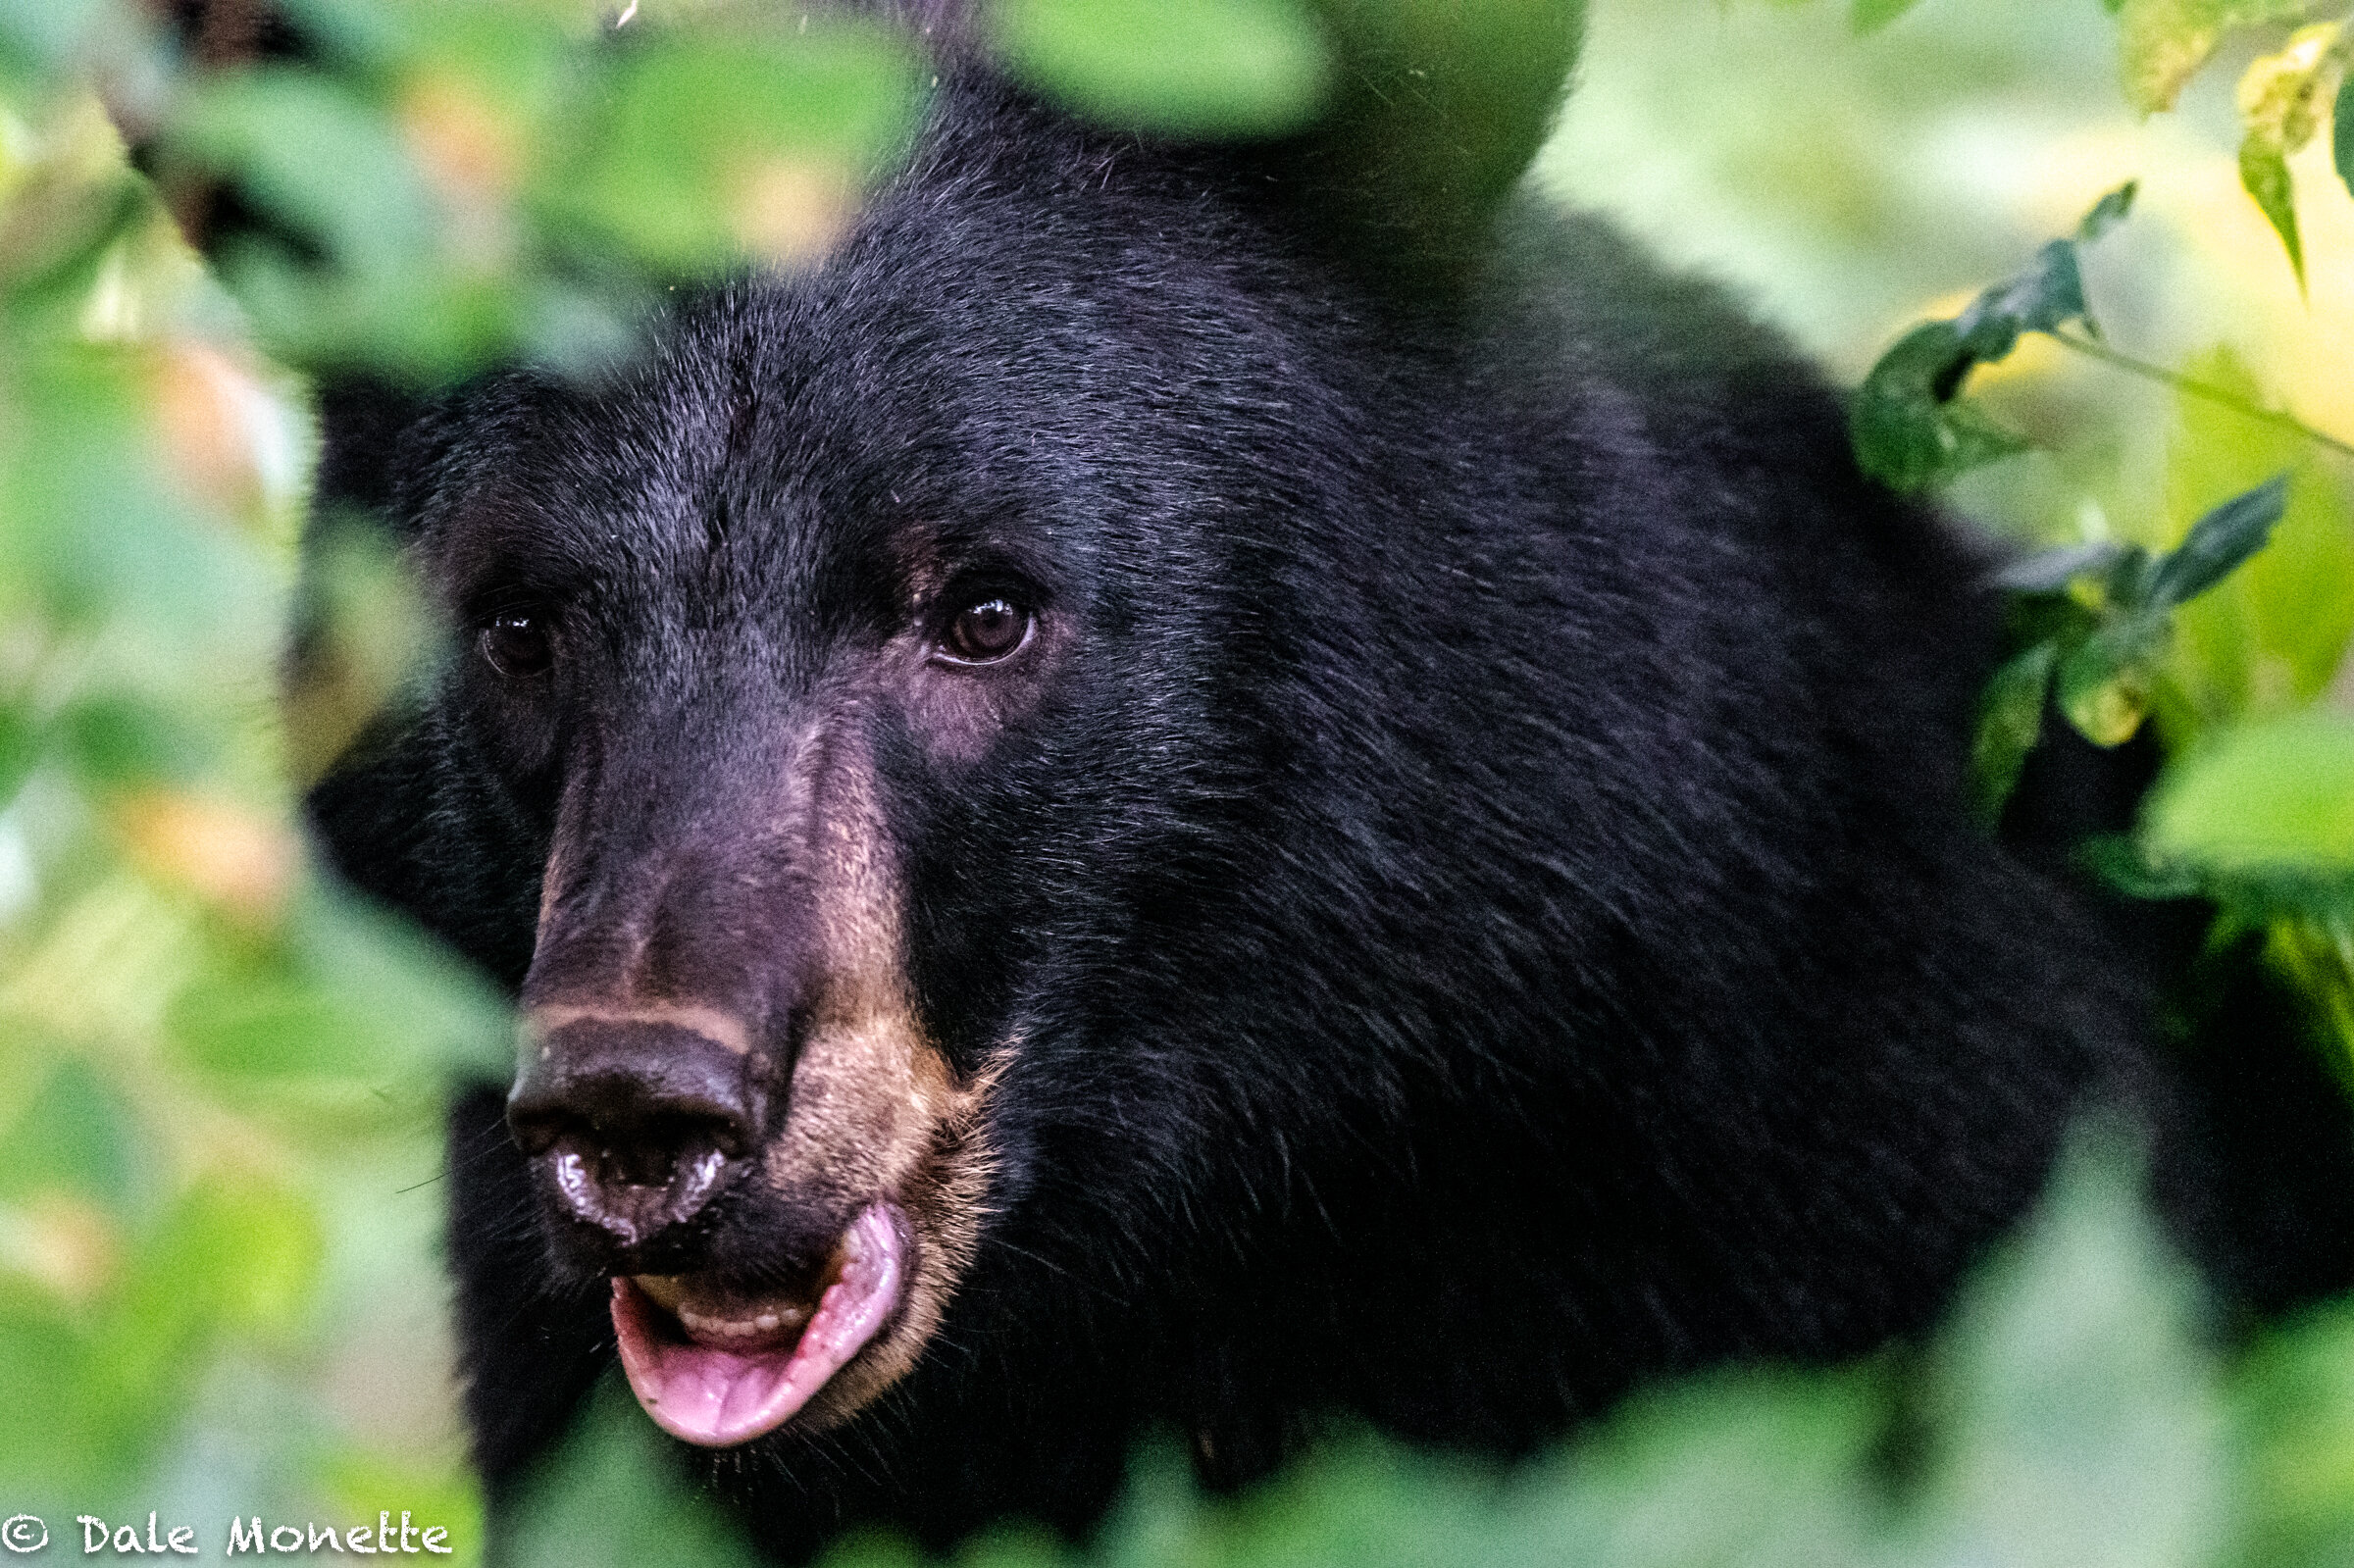   In September of 2019 I was taking photos of a beaver lodge and this black bear jumped up on a stone wall about 40 feet from me. It scared the crap out of me and I froze immediately wondering what to do next. It just stared at me and was there for w